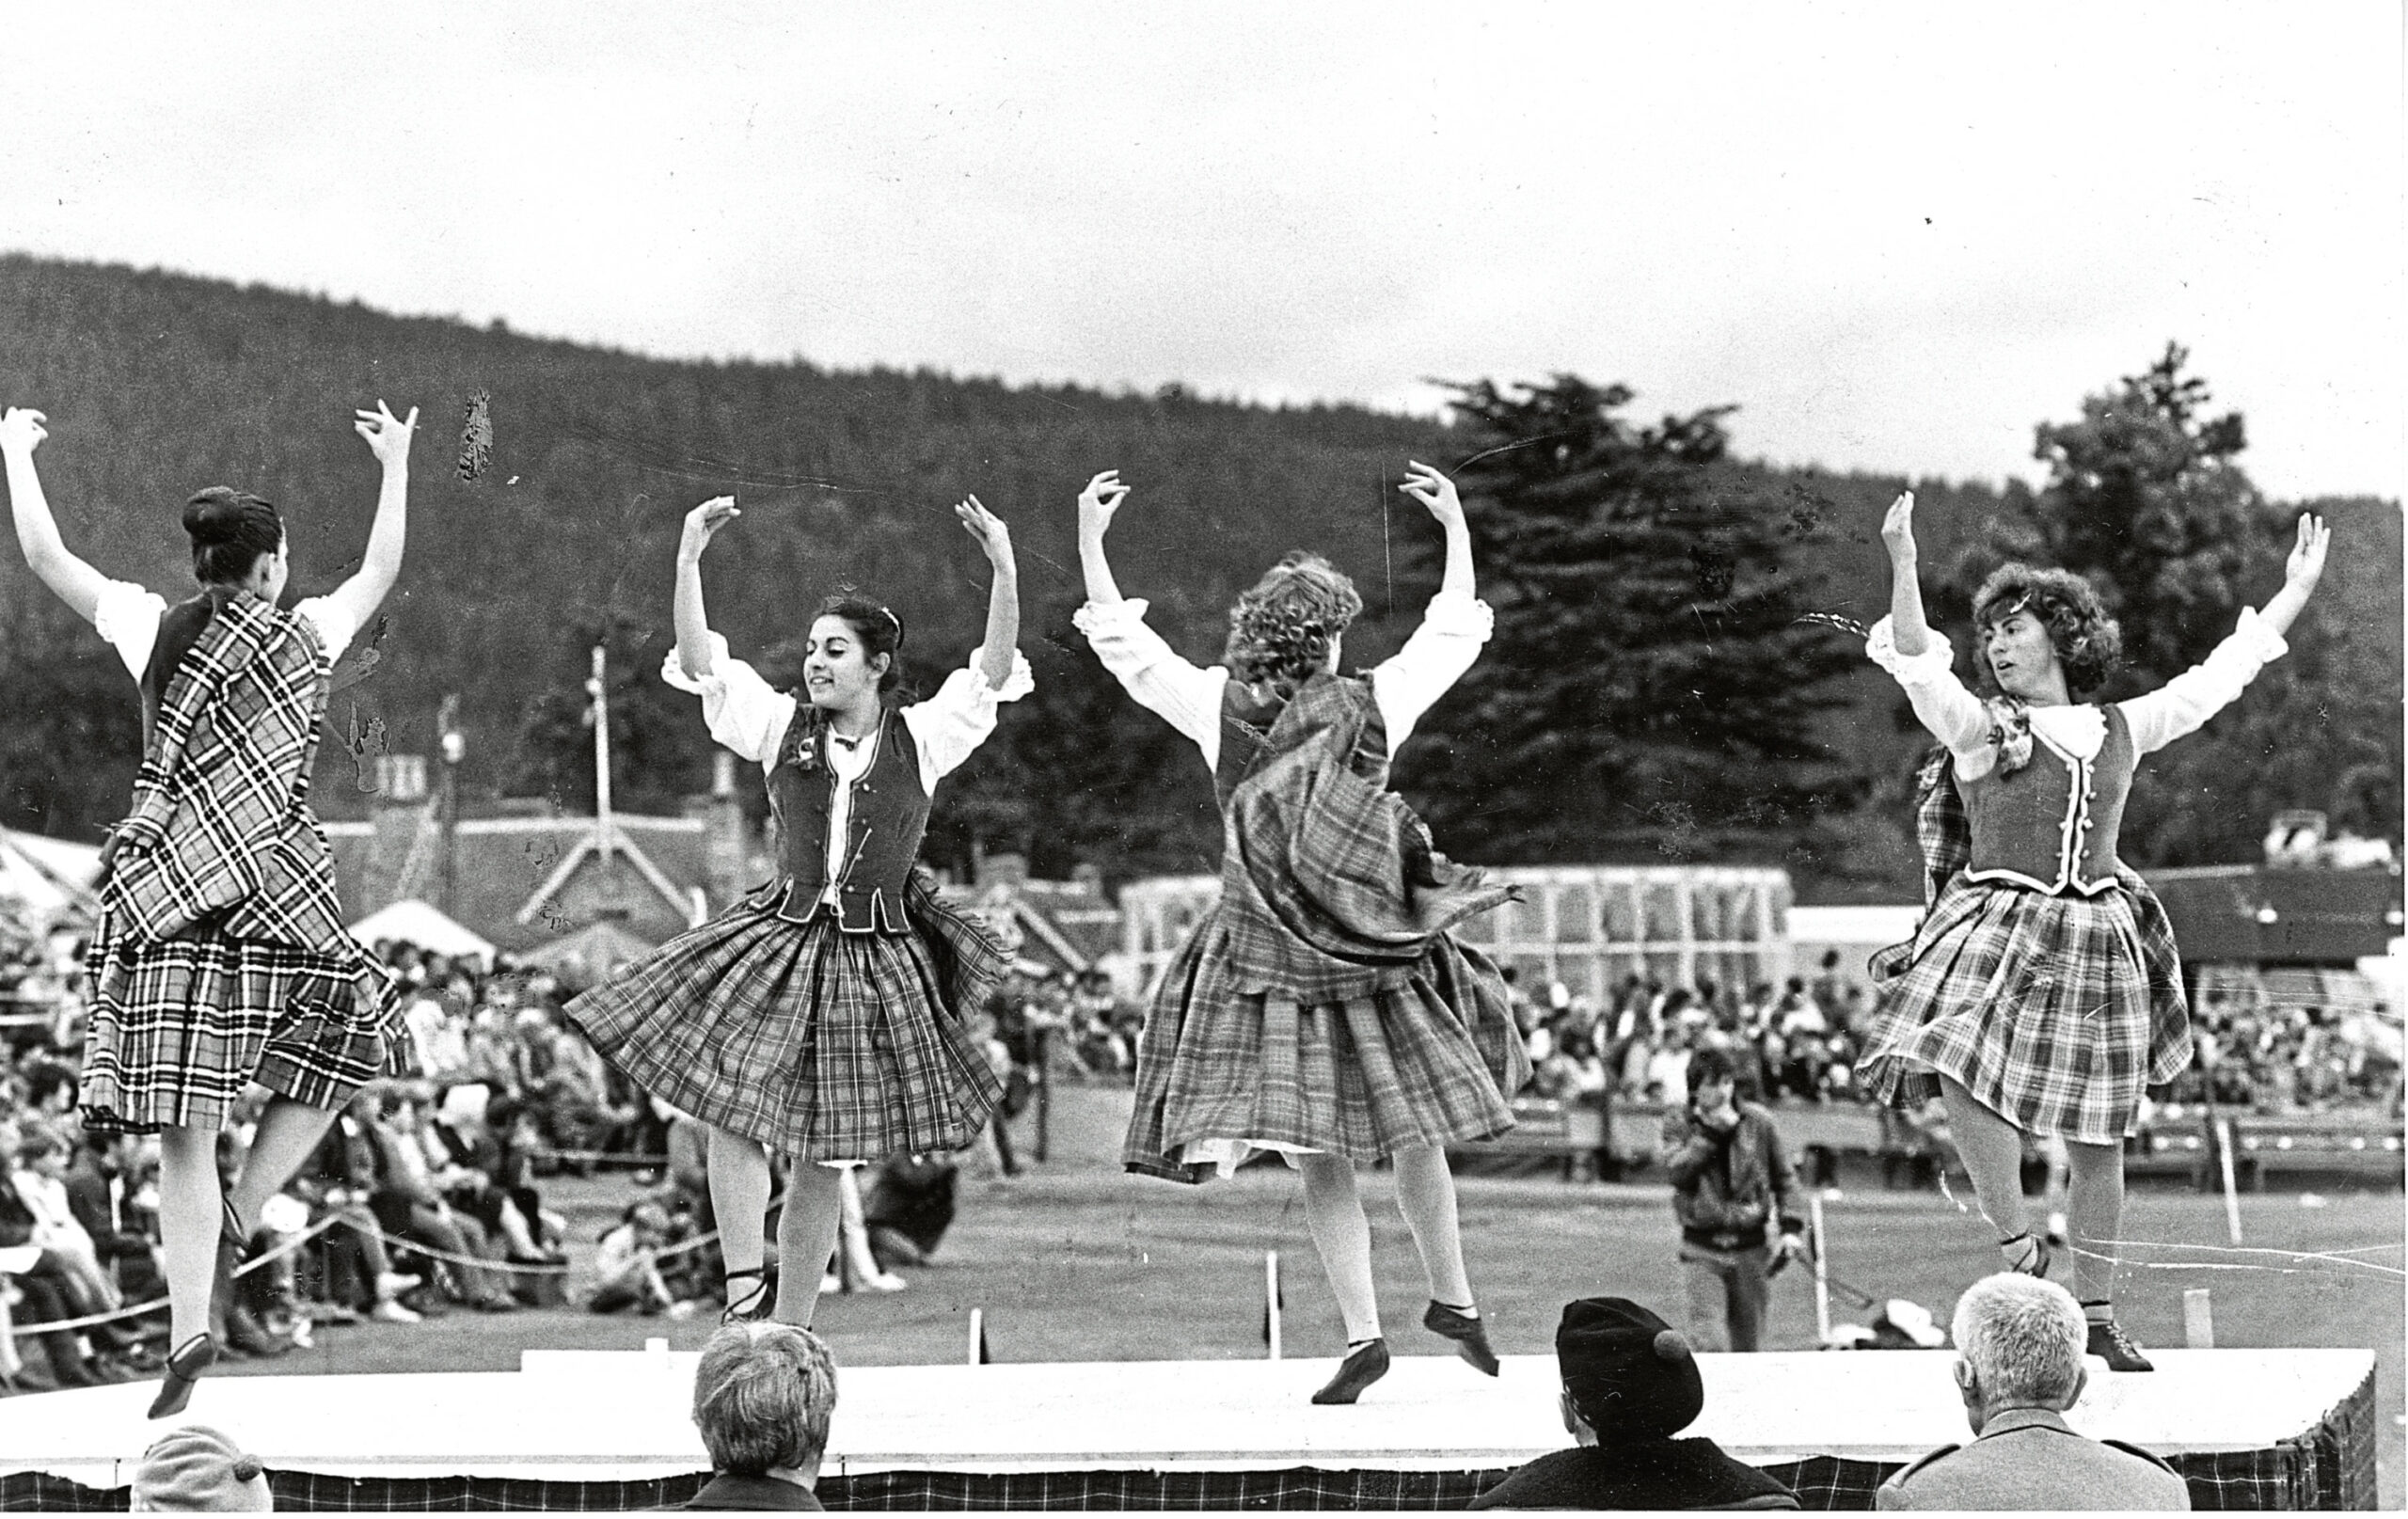 Adele Lapwood, from Forfar, competing with fellow Highland dancers Janine Beaty, of Lanark, and Nandy Sotiropouos and Alison Greig, both from Australia in the 1984 Aboyne Games.